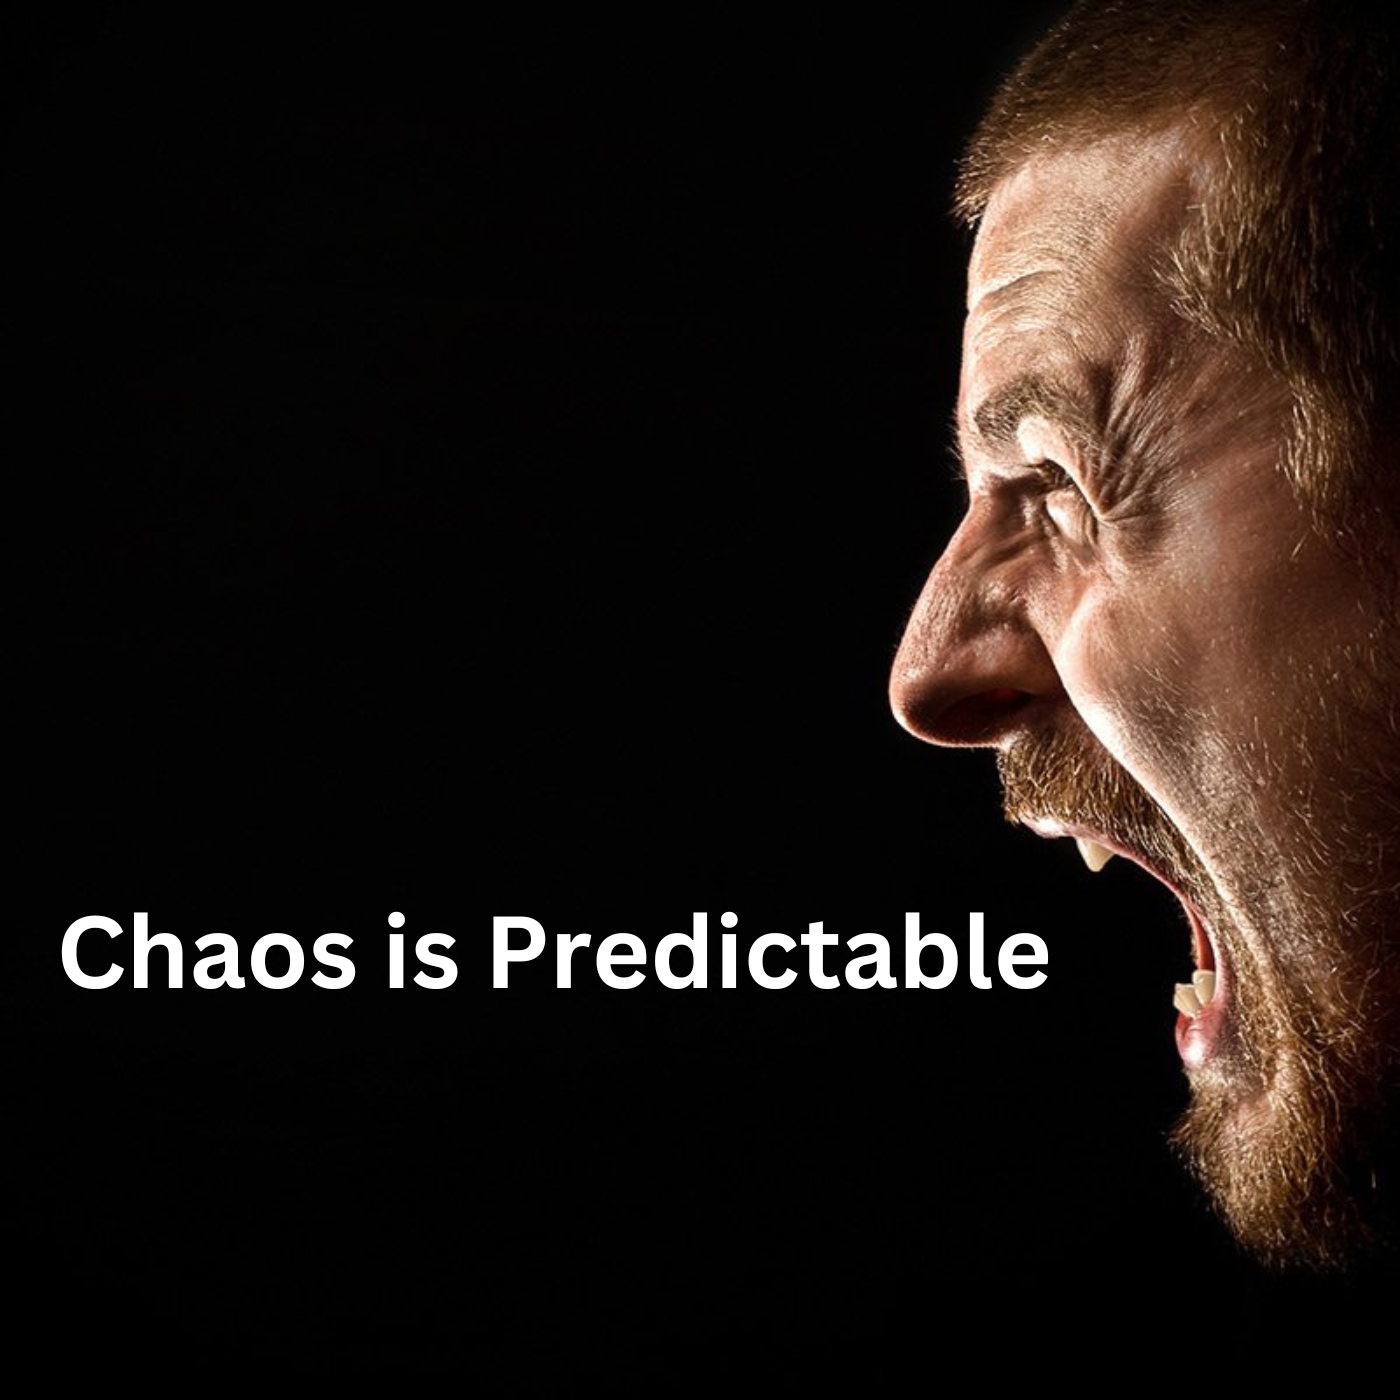 * Chaos is Predictable